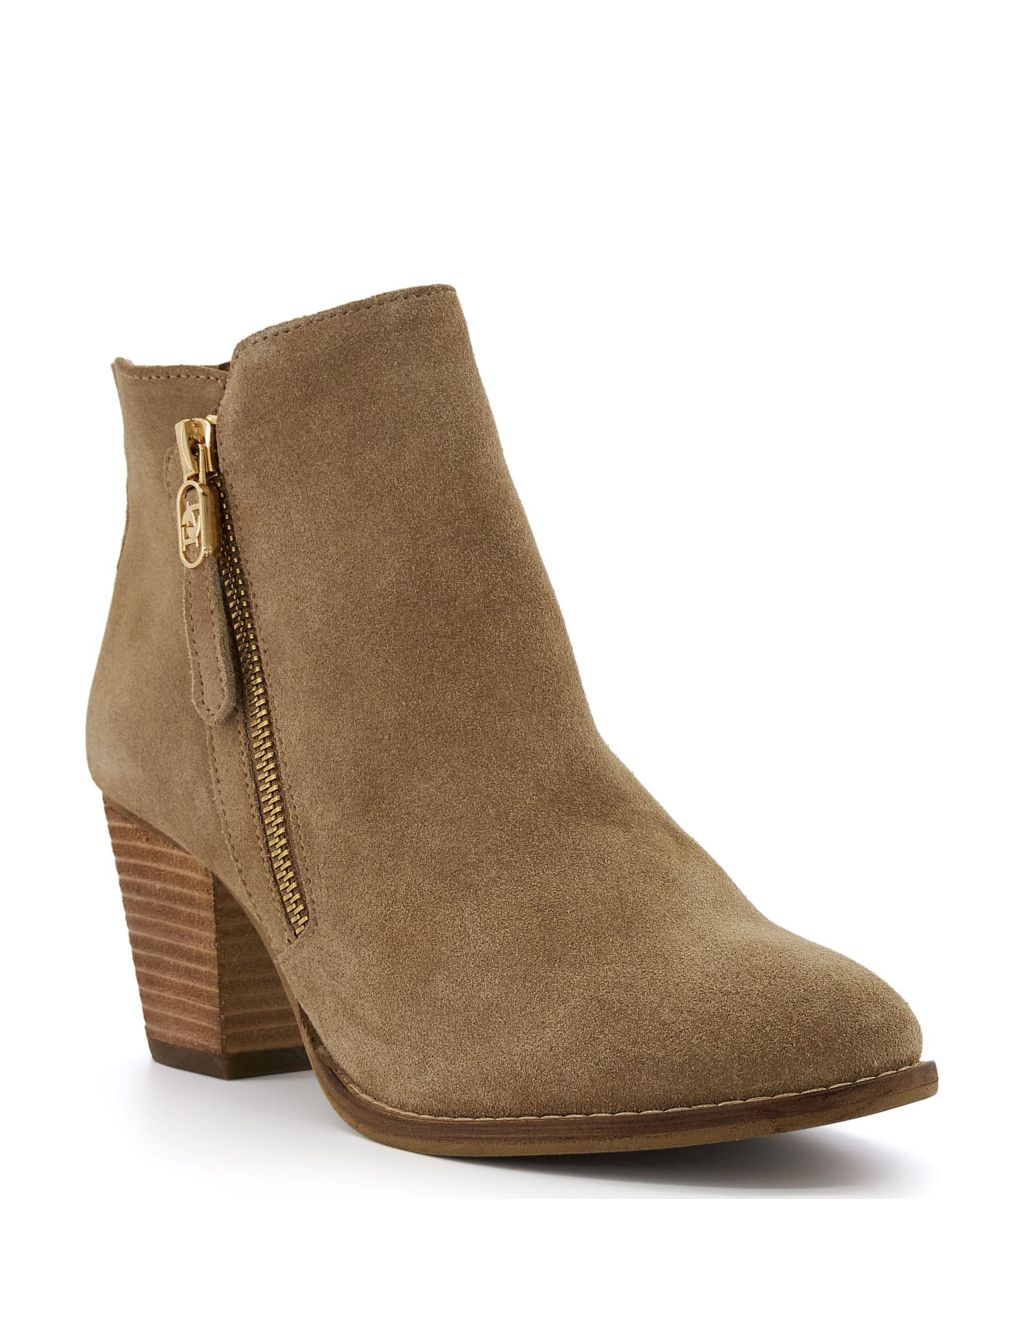 Suede Block Heel Round Toe Ankle Boots image 2